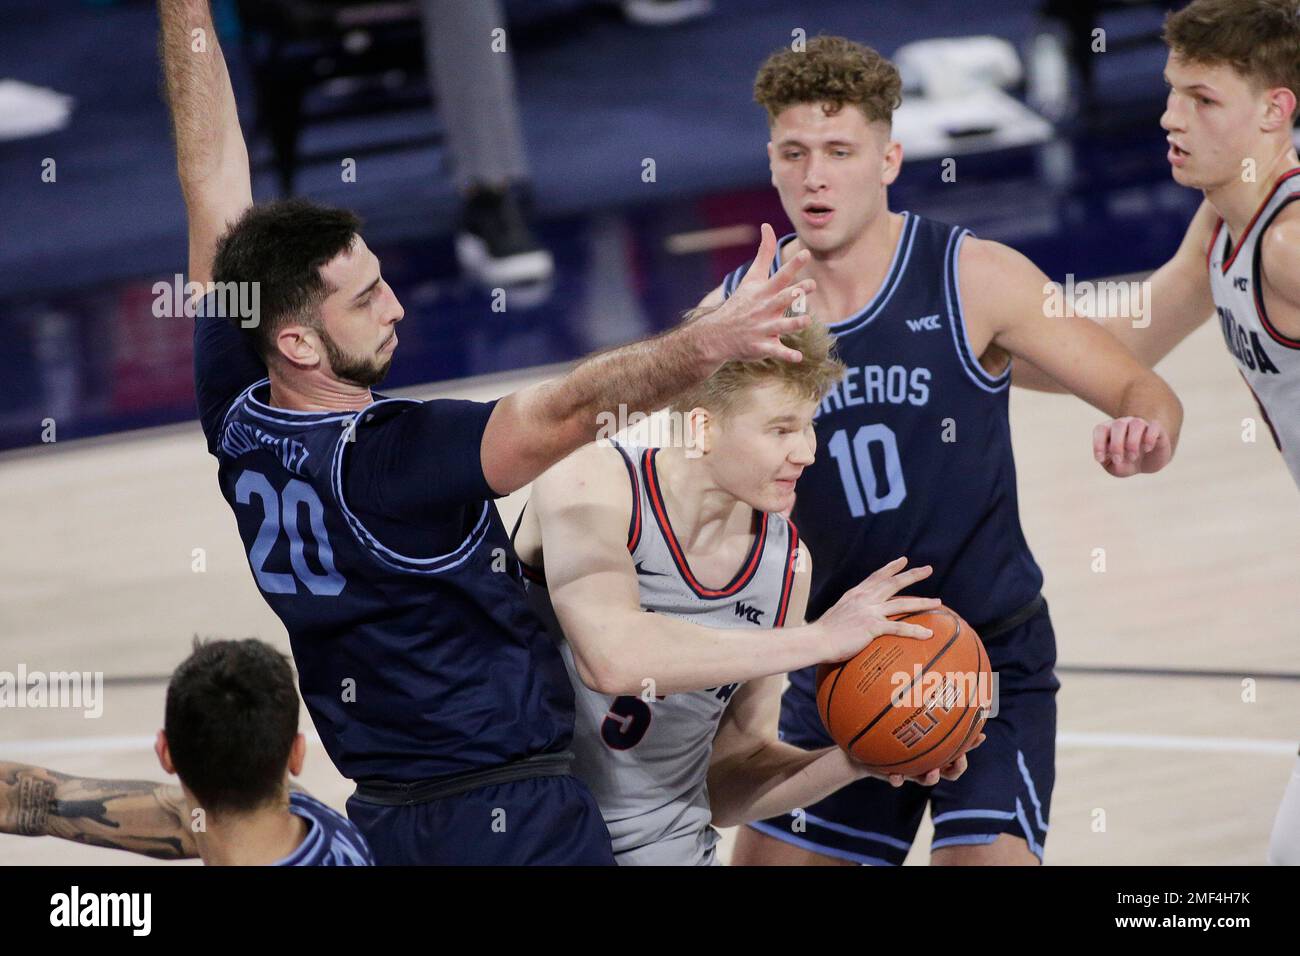 Gonzaga guard Martynas Arlauskas (5) looks to pass between San Diego  forward Jared Rodriguez (20) and forward Mikal Gjerde (10) during the  second half of an NCAA college basketball game in Spokane,